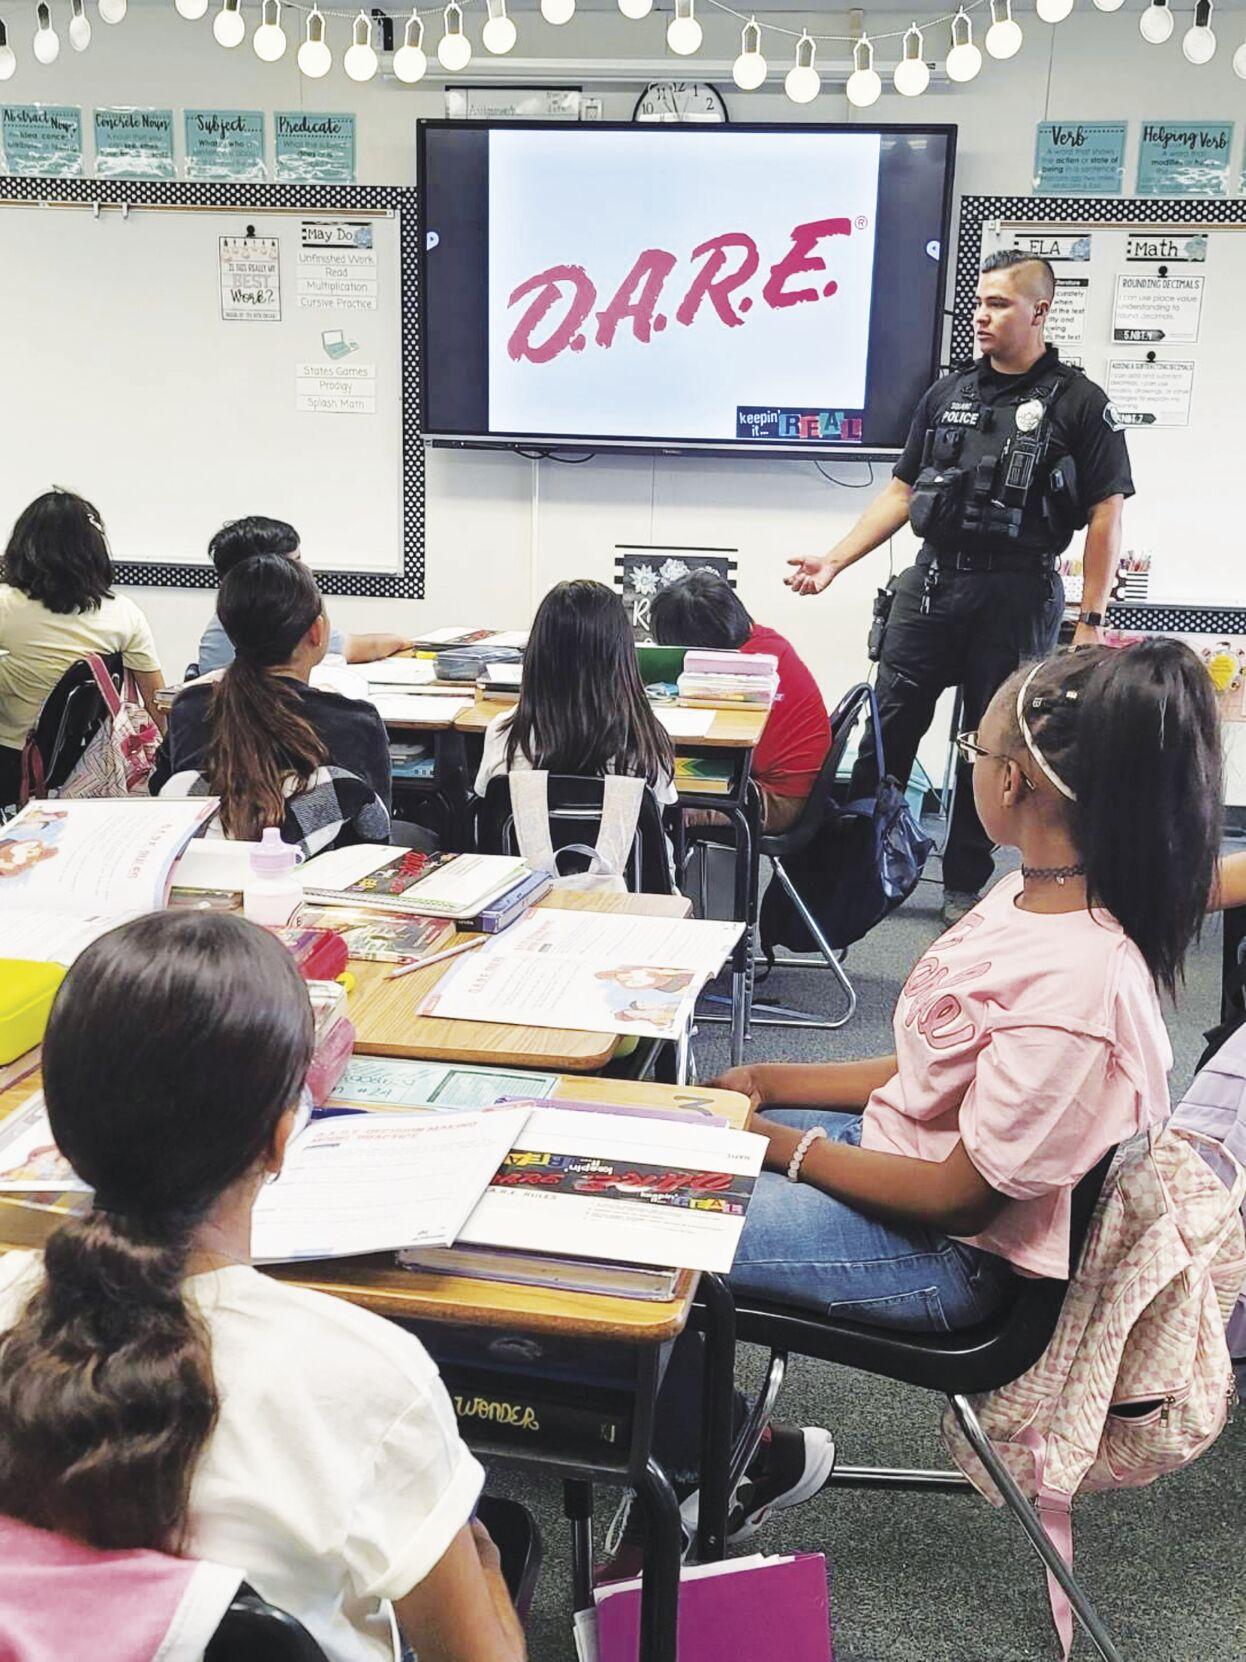 Officer Matthew Solano is shown teaching students drug resistance strategies during the inaugural DARE class at the Cal Aero Preserve Academy in Chino on Aug. 9. Chino Valley School District photo